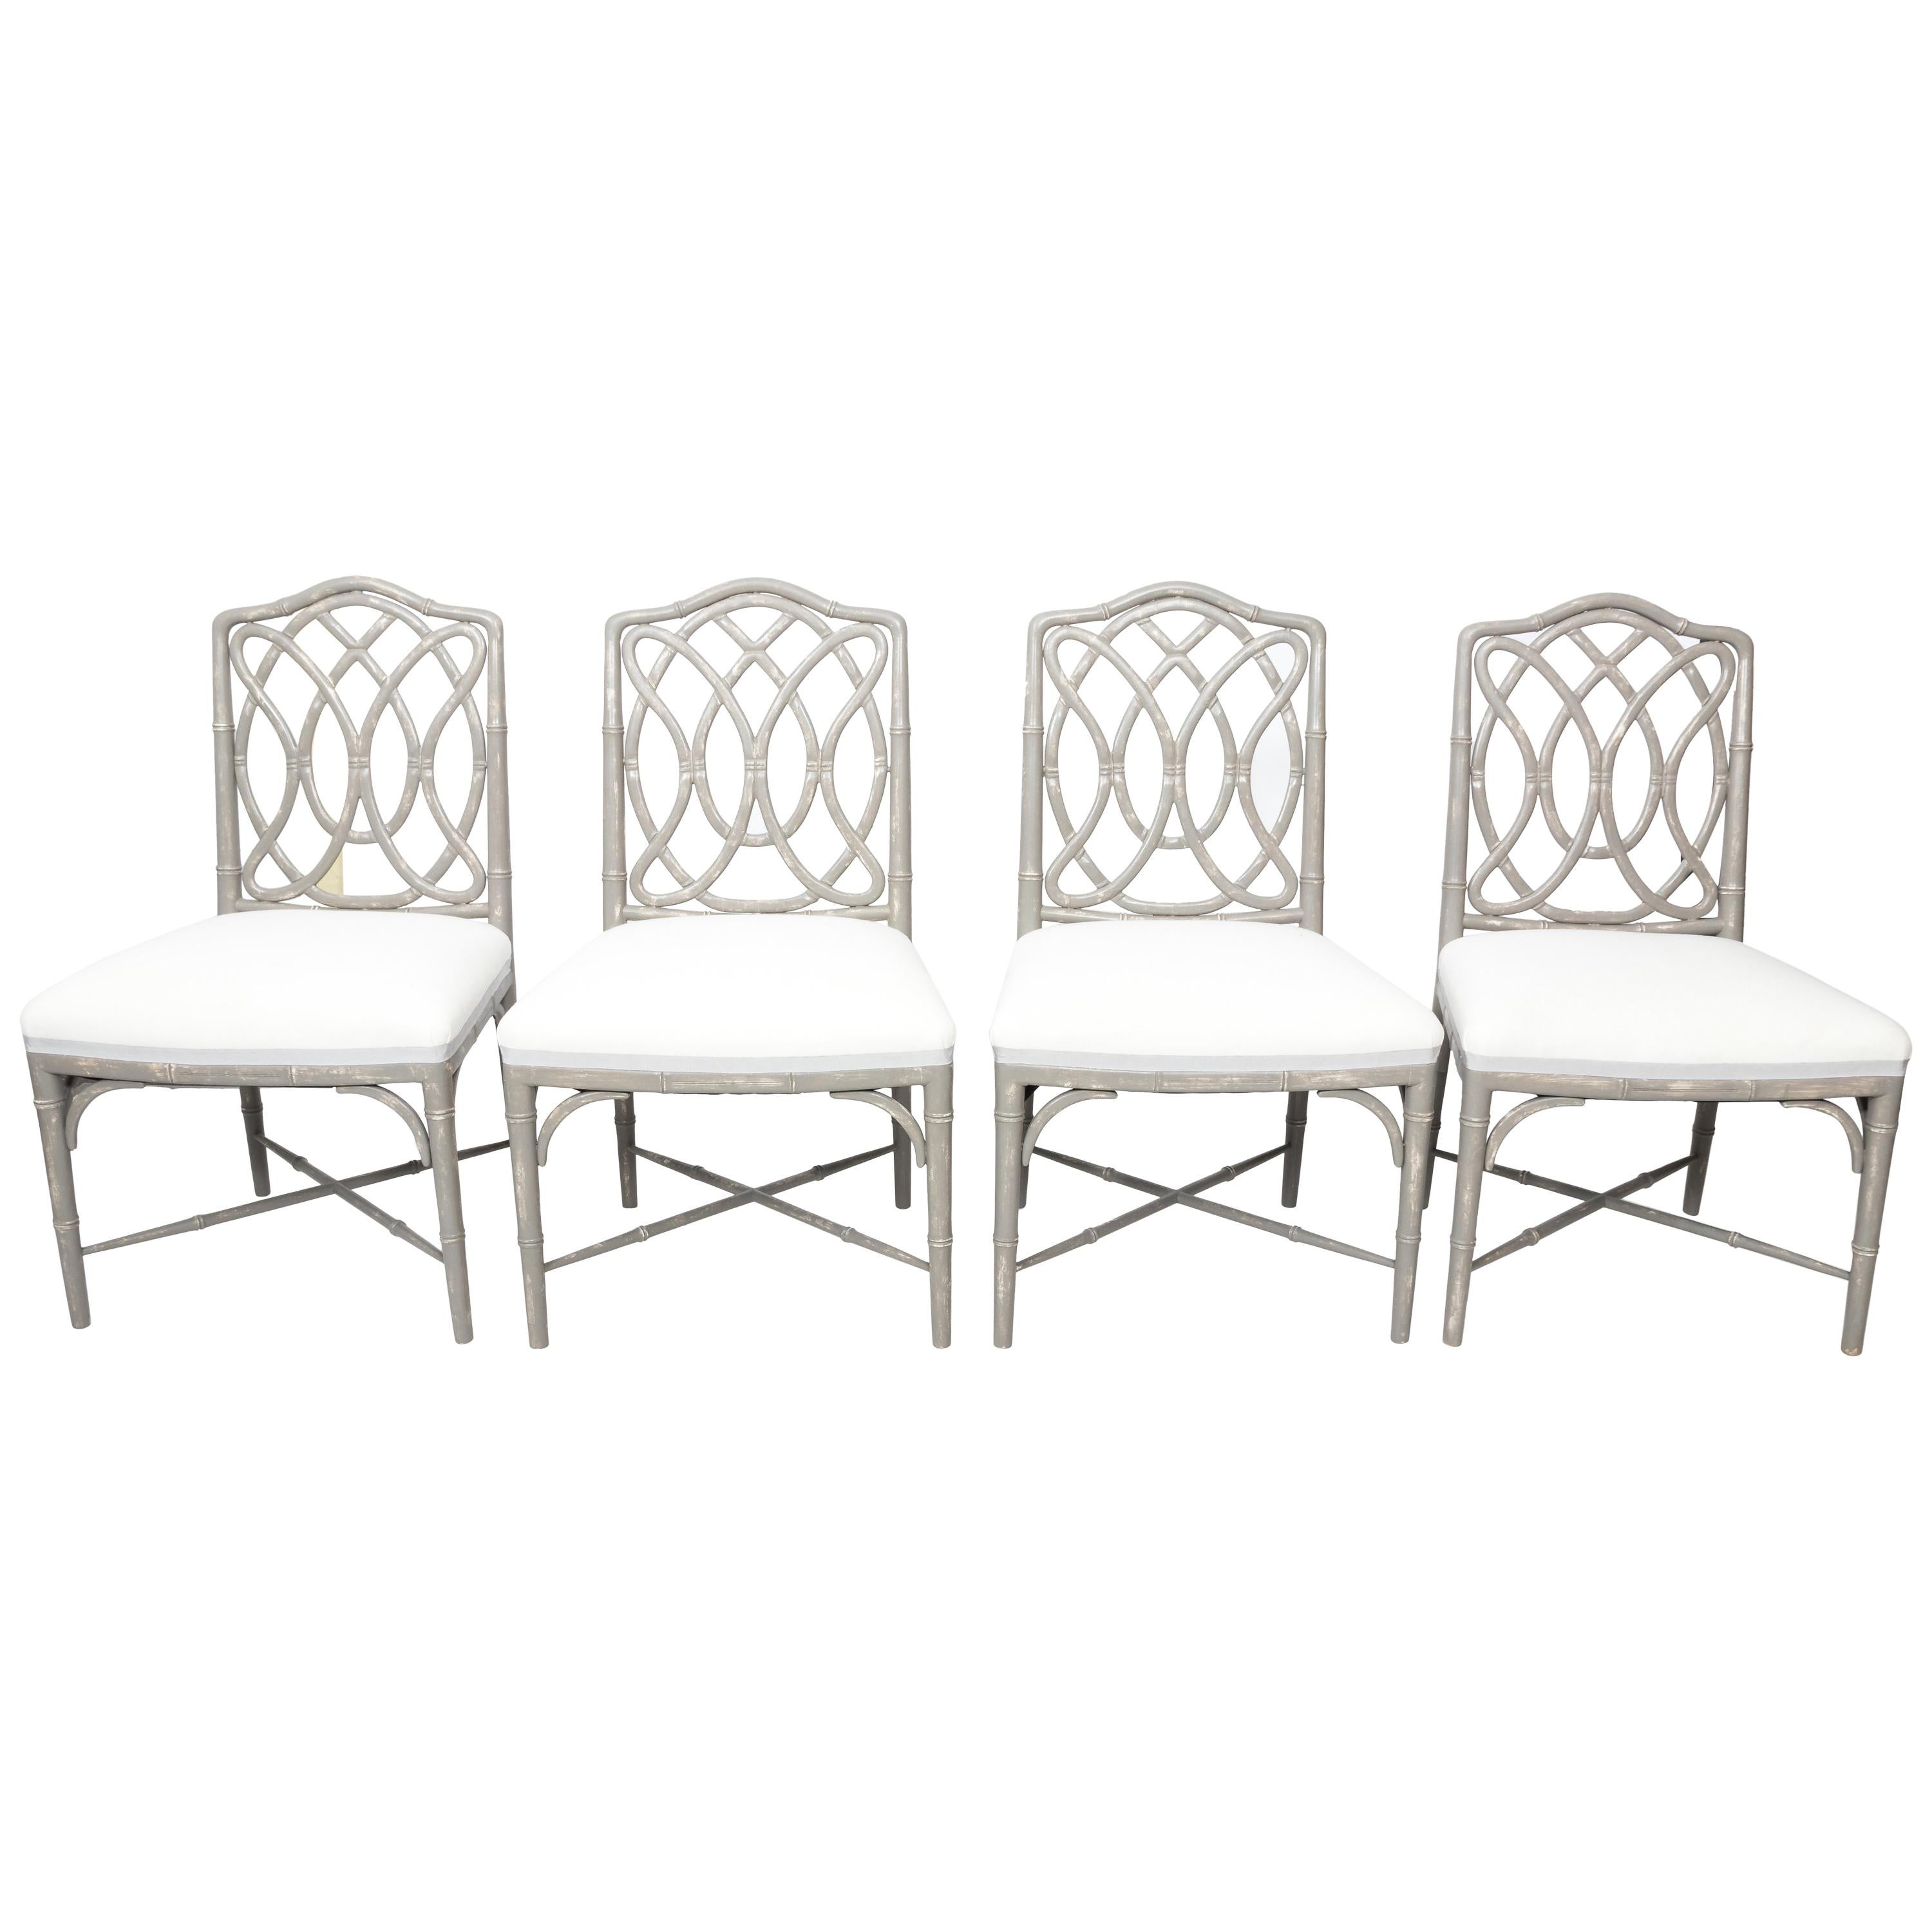 Faux Bamboo Chinoiserie Gray Painted Dining Chairs, set of 4